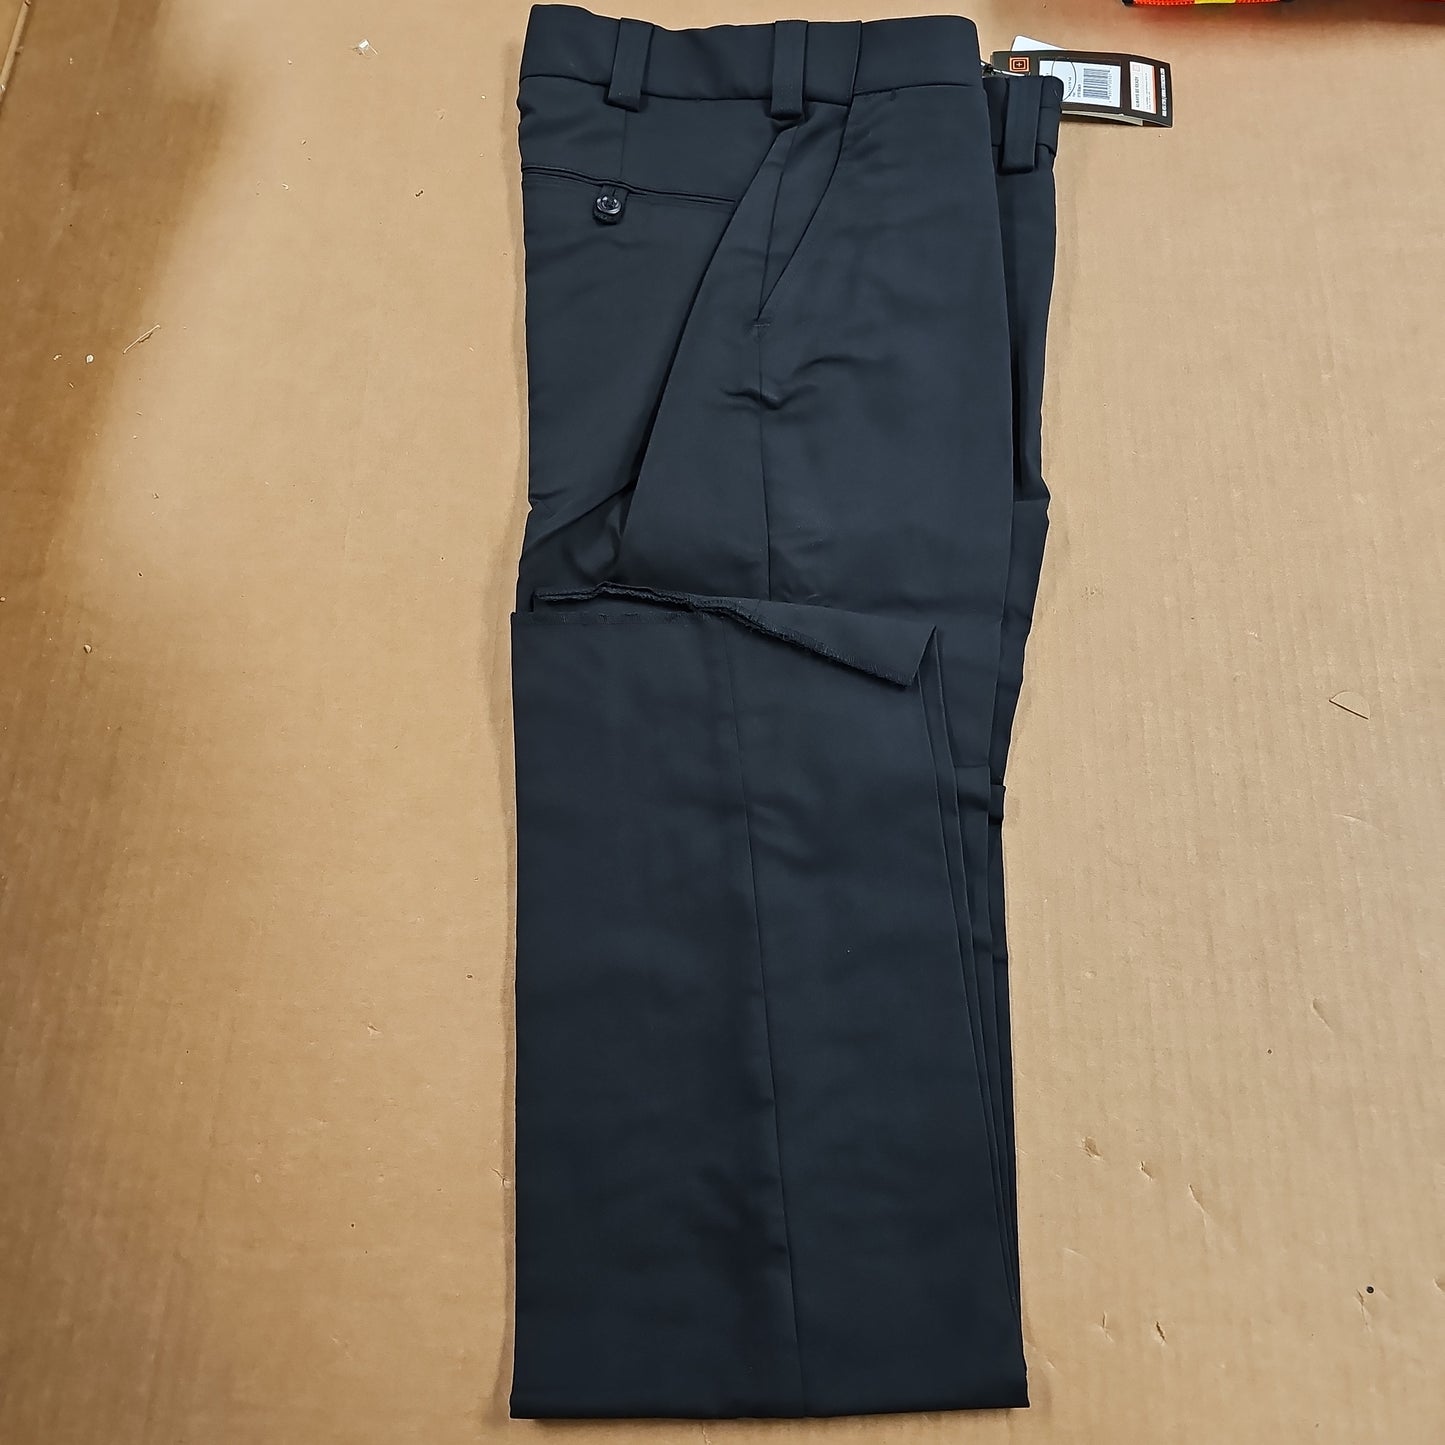 5.11 Tactical Pant Womens Twill FT Polywool Class A Black Size 4 64424-019-4